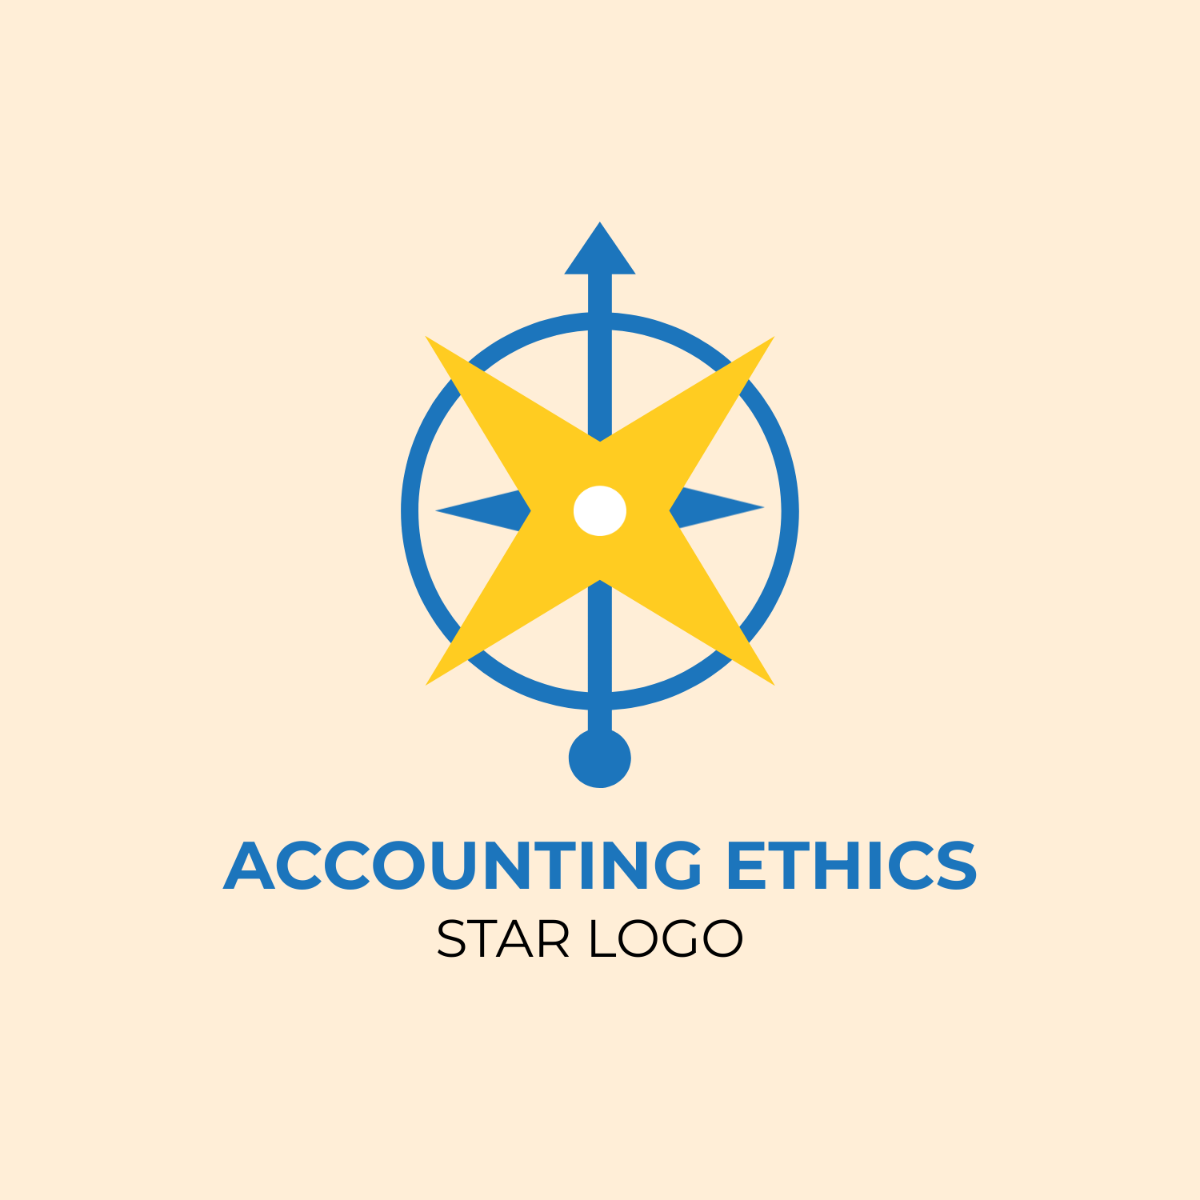 Free Accounting Ethics Star Logo Template